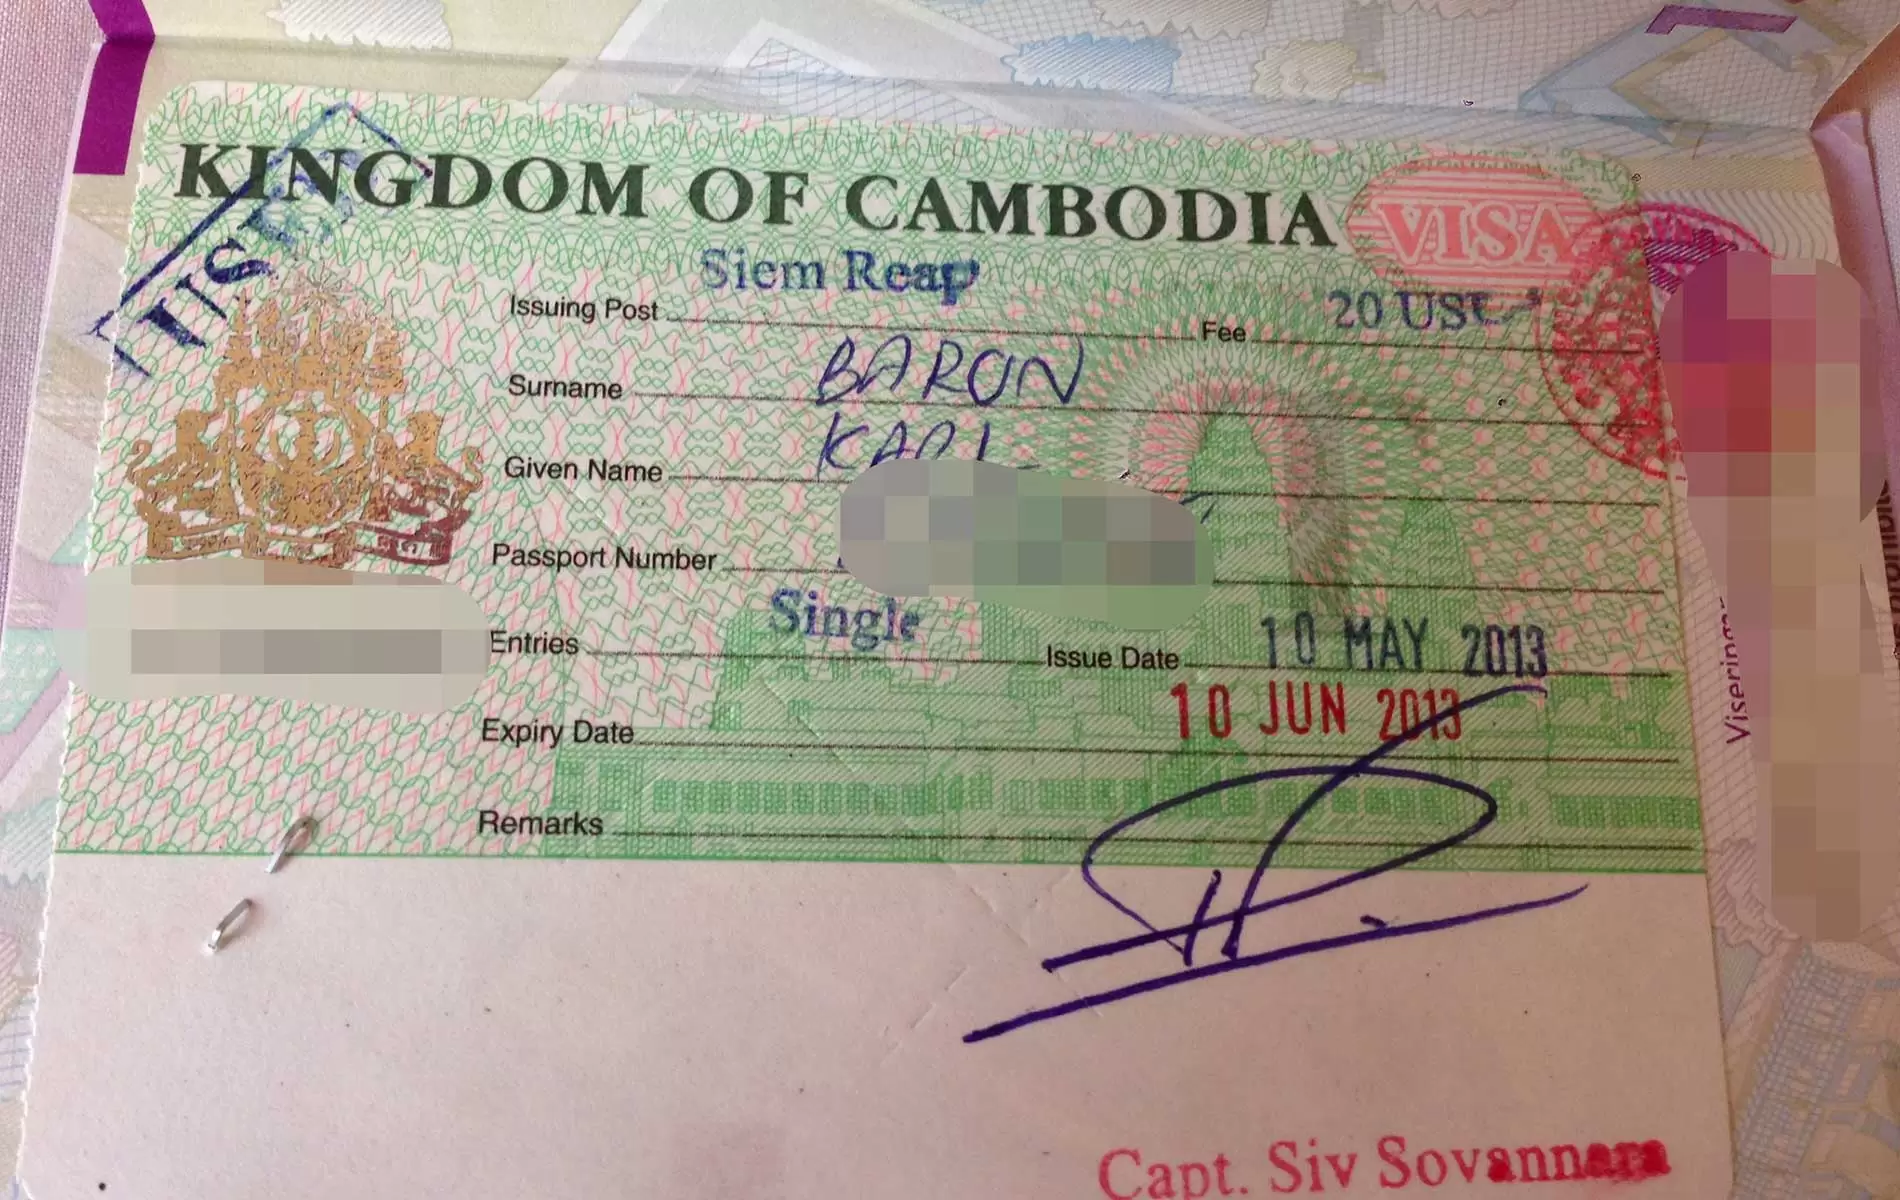 where can cambodia travel without visa